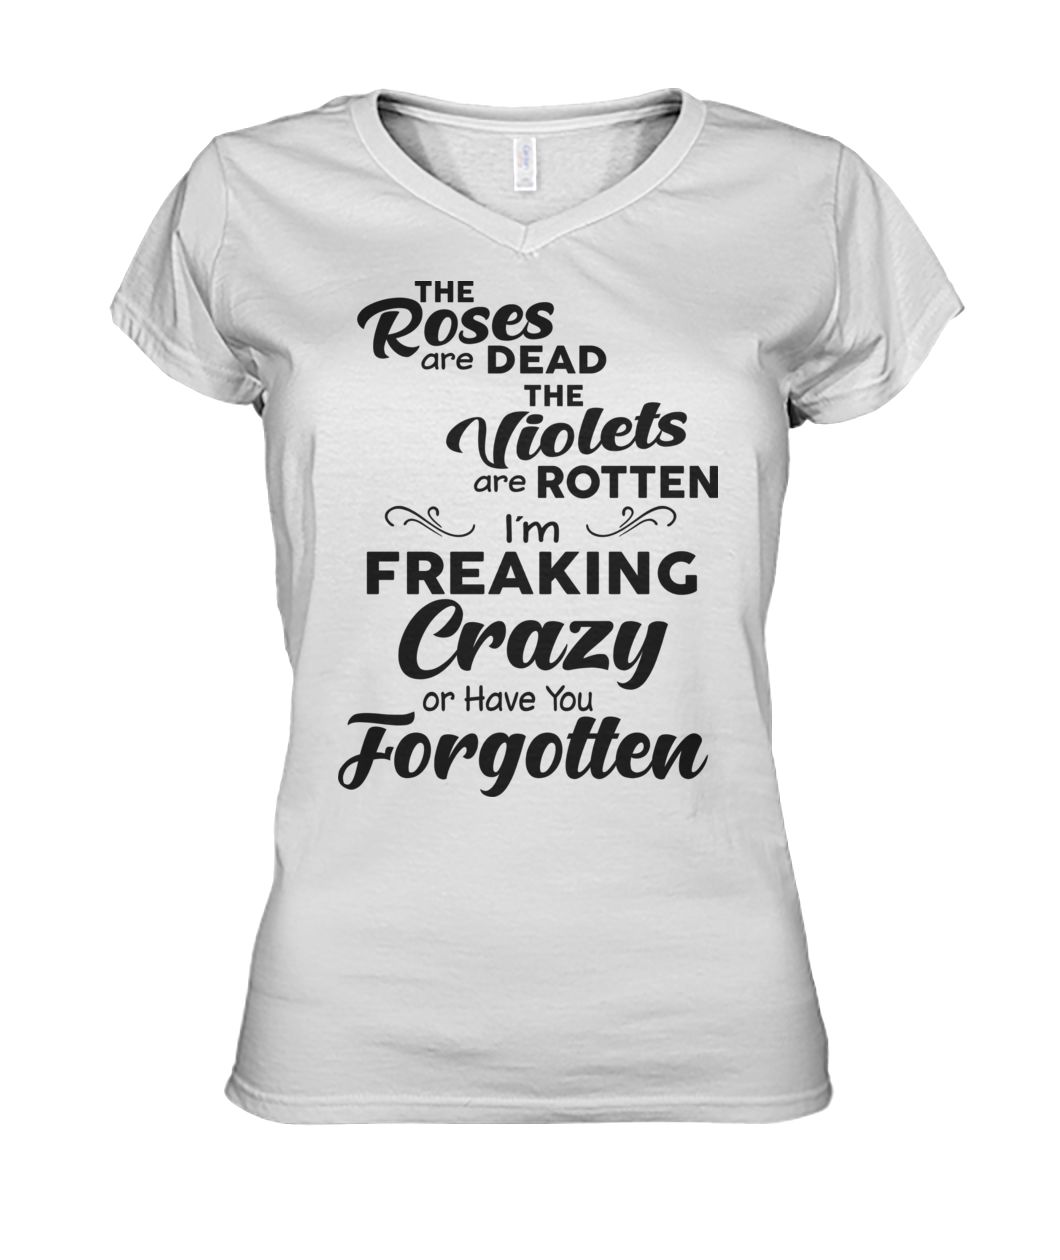 The roses are dead the violets are rotten I'm freaking crazy or have you forgotten women's v-neck